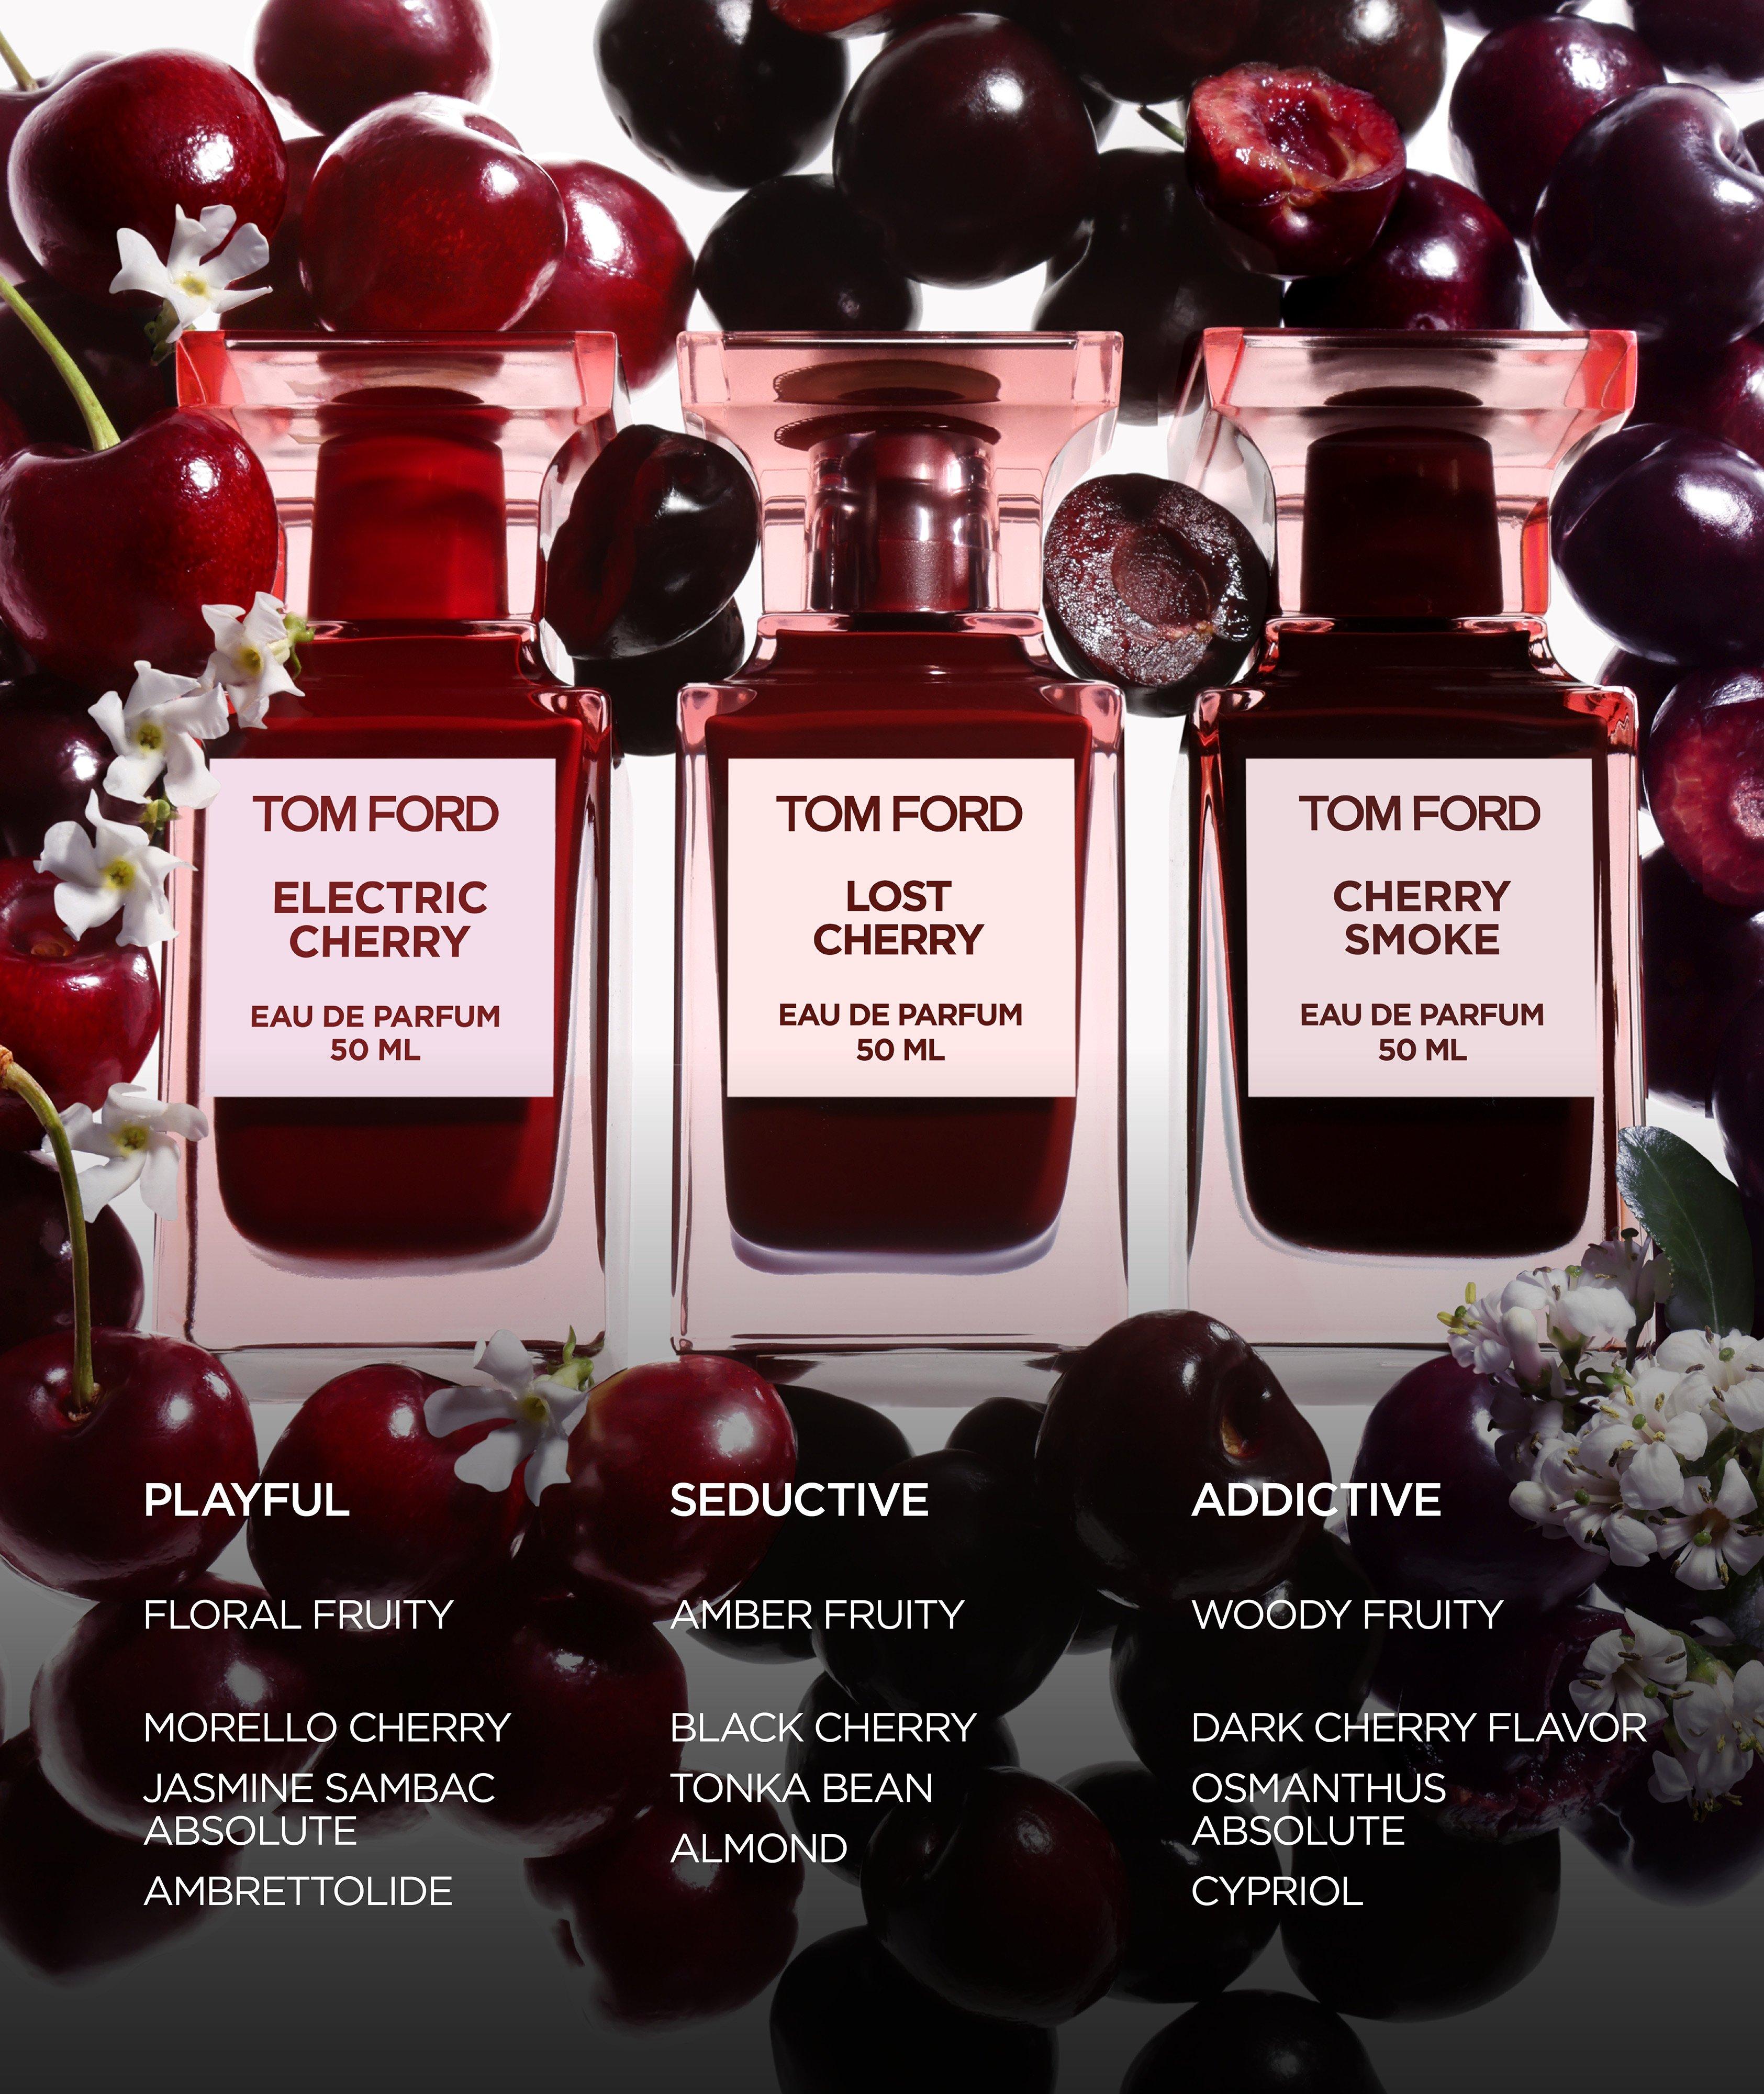 TOM FORD ELECTRIC CHERRY 30ml